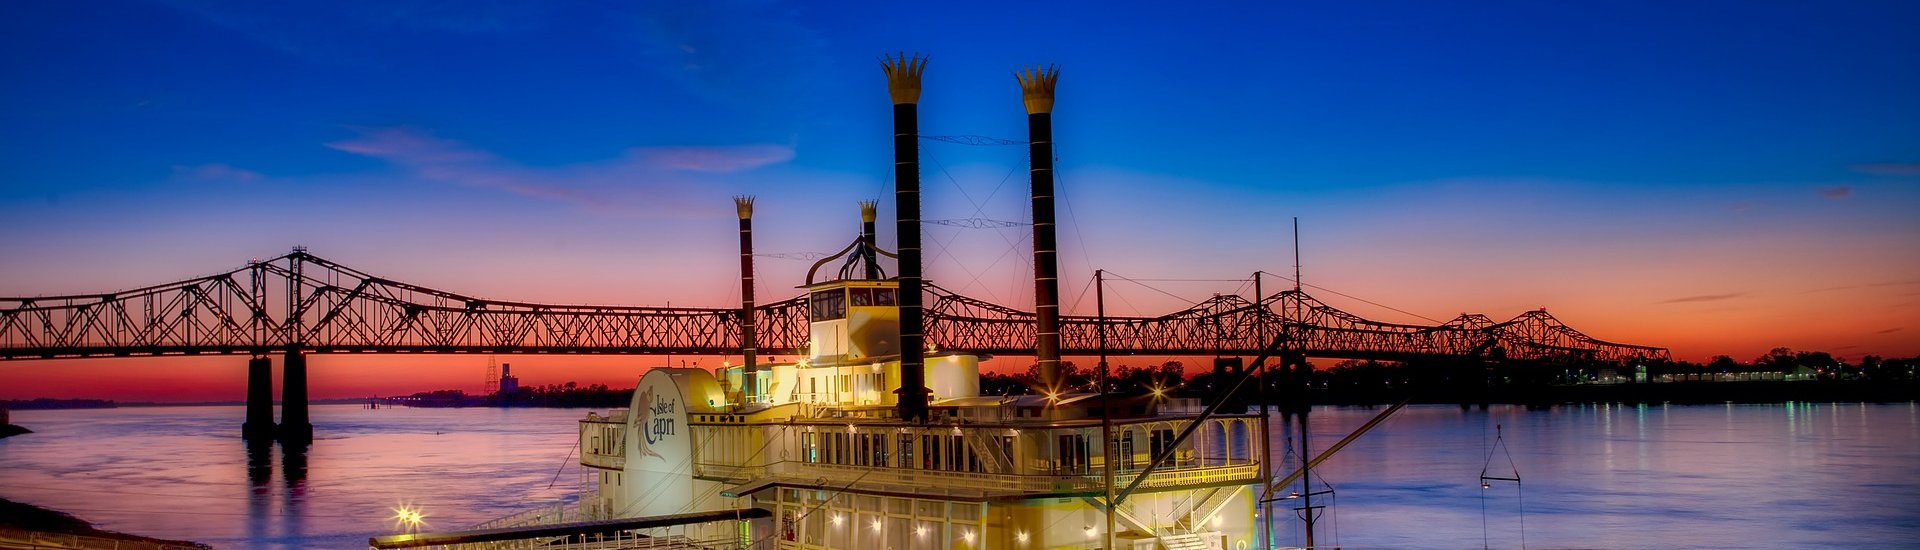 An exciting tour taking in the highlights of The Deep South